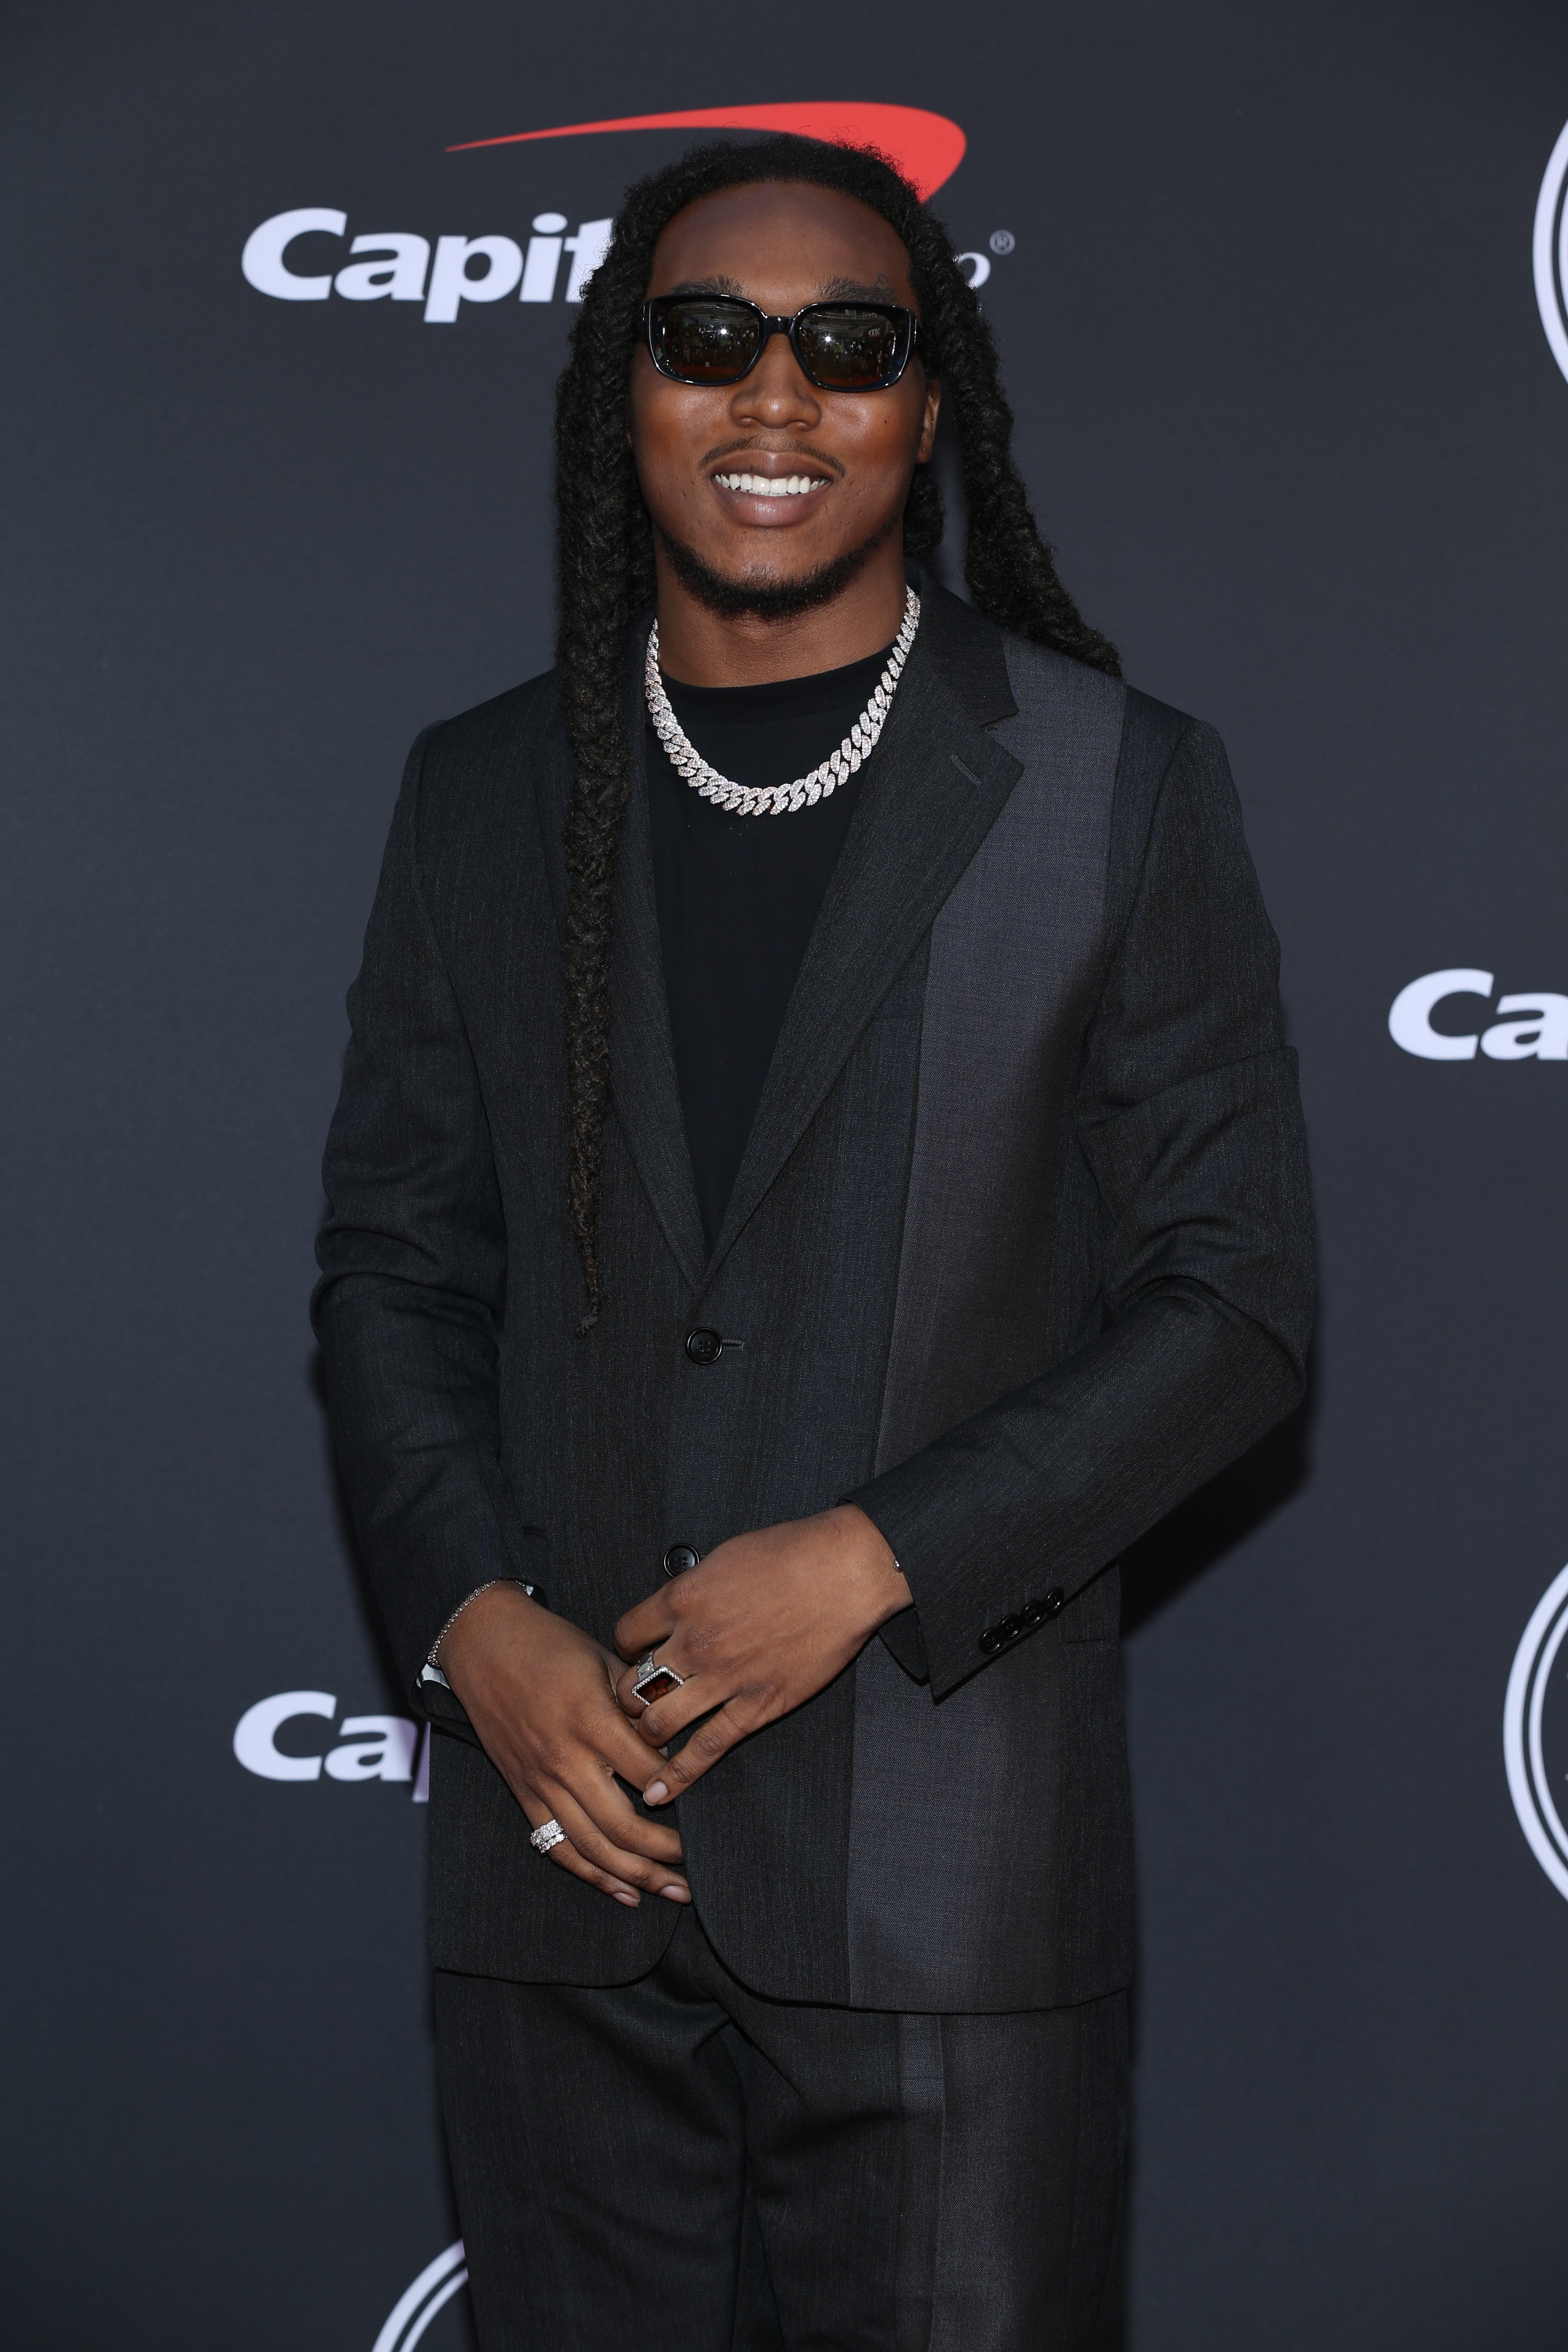 Blowouts, Braids and Locs Were The Styles Of Choice For This Years ESPYs